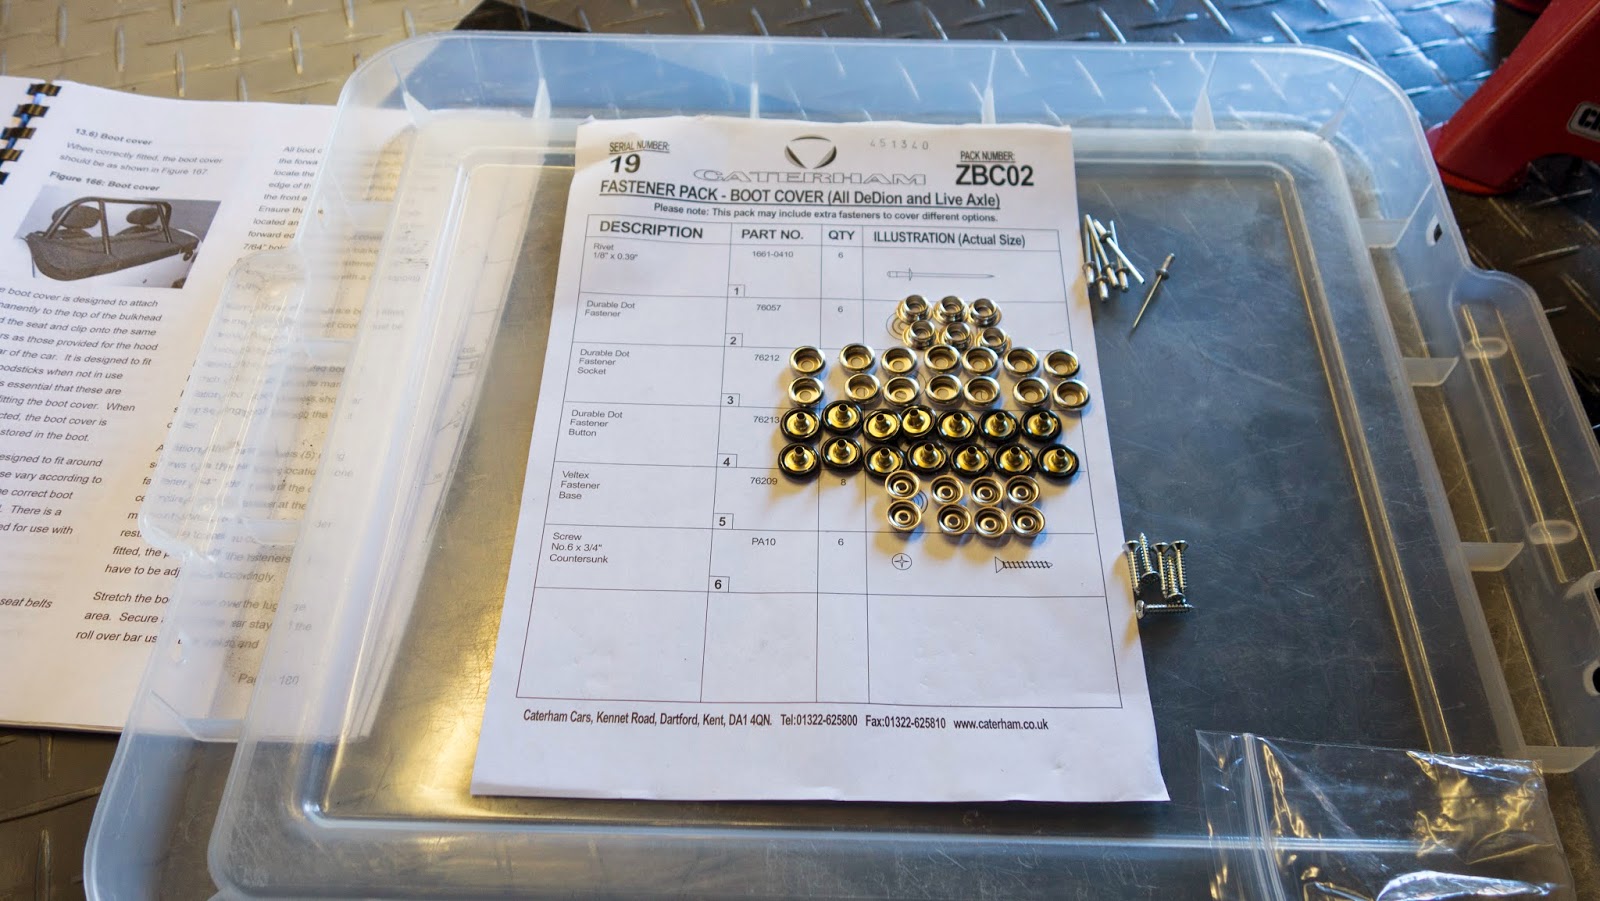 I laid out the dura dot fastener pack to make sure I was using the right ones in the right places.